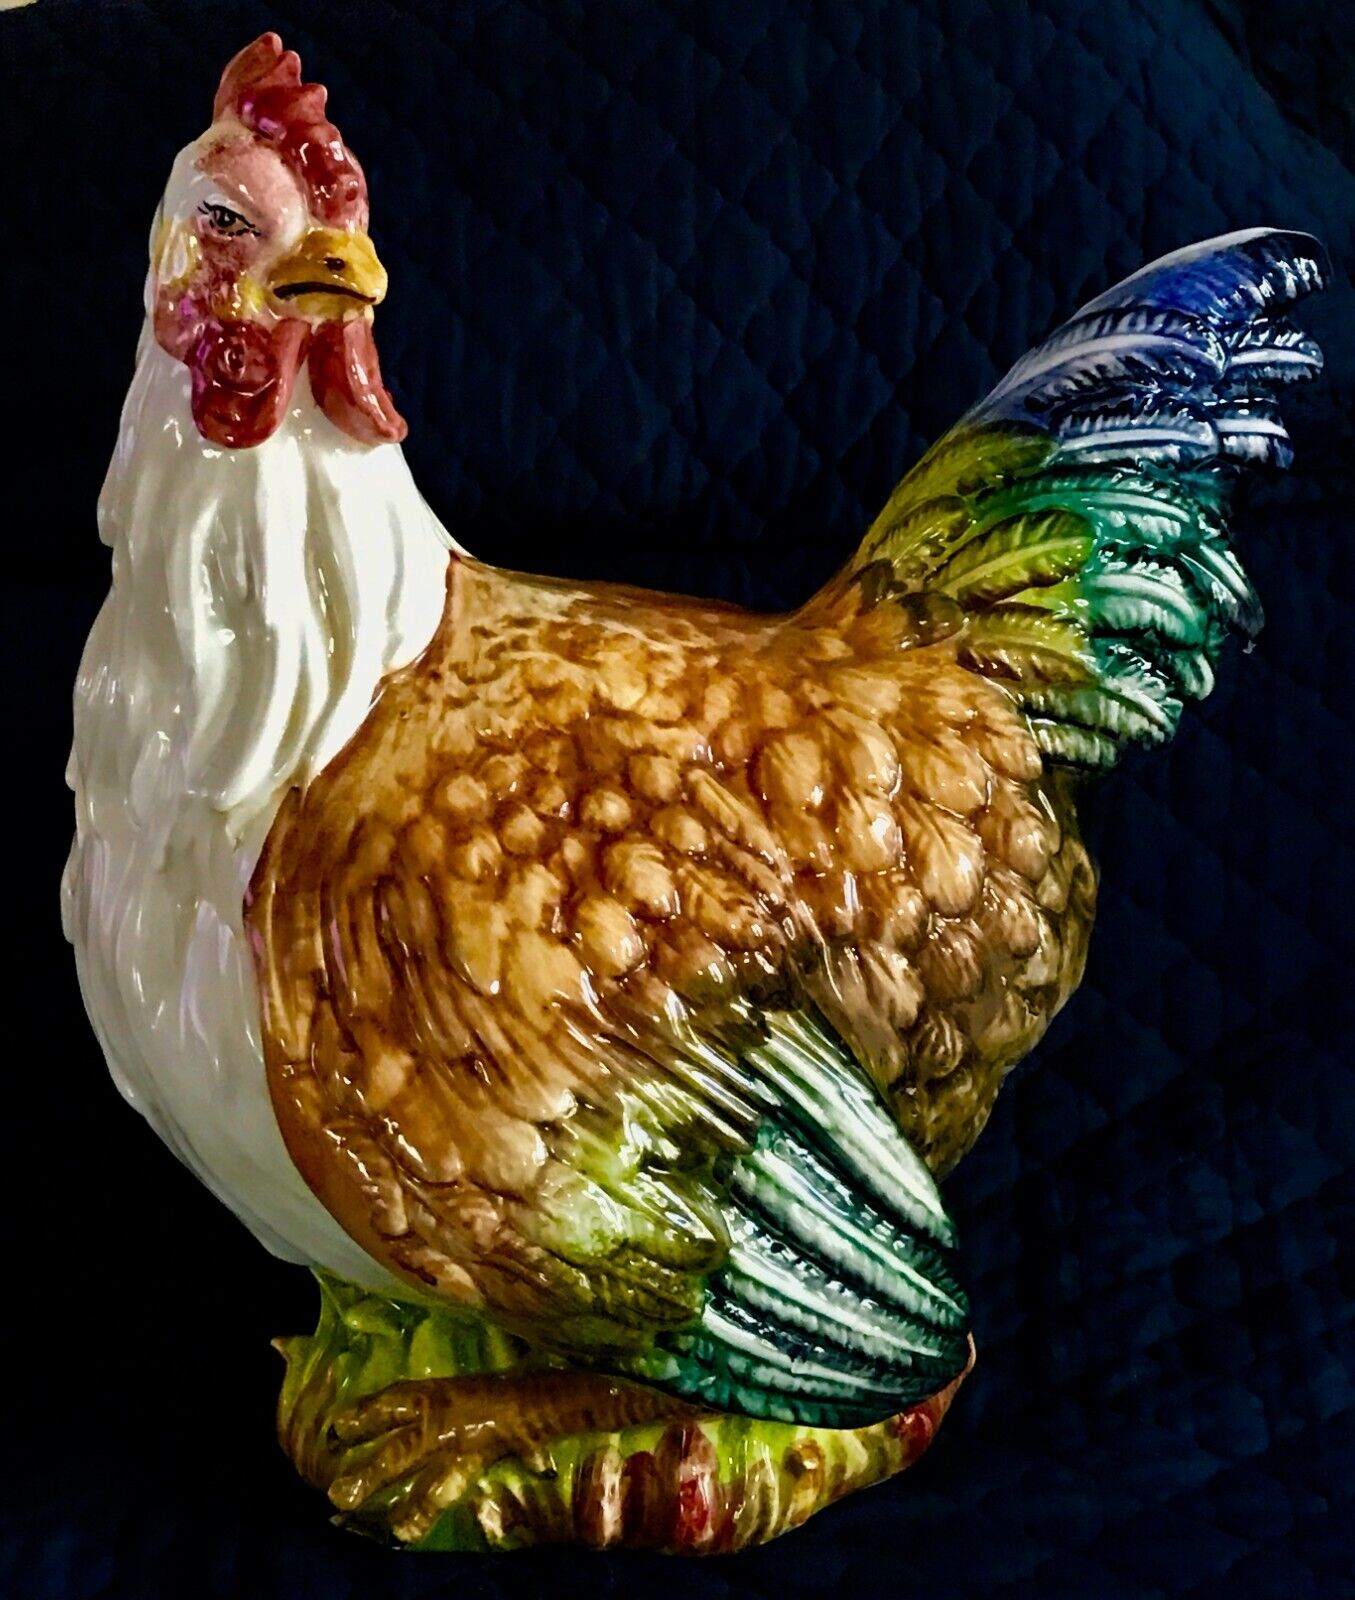 INTRADA ITALY Ceramic, 21” Rooster Sculpture, Hand-Cast & Hand Painted, VTG